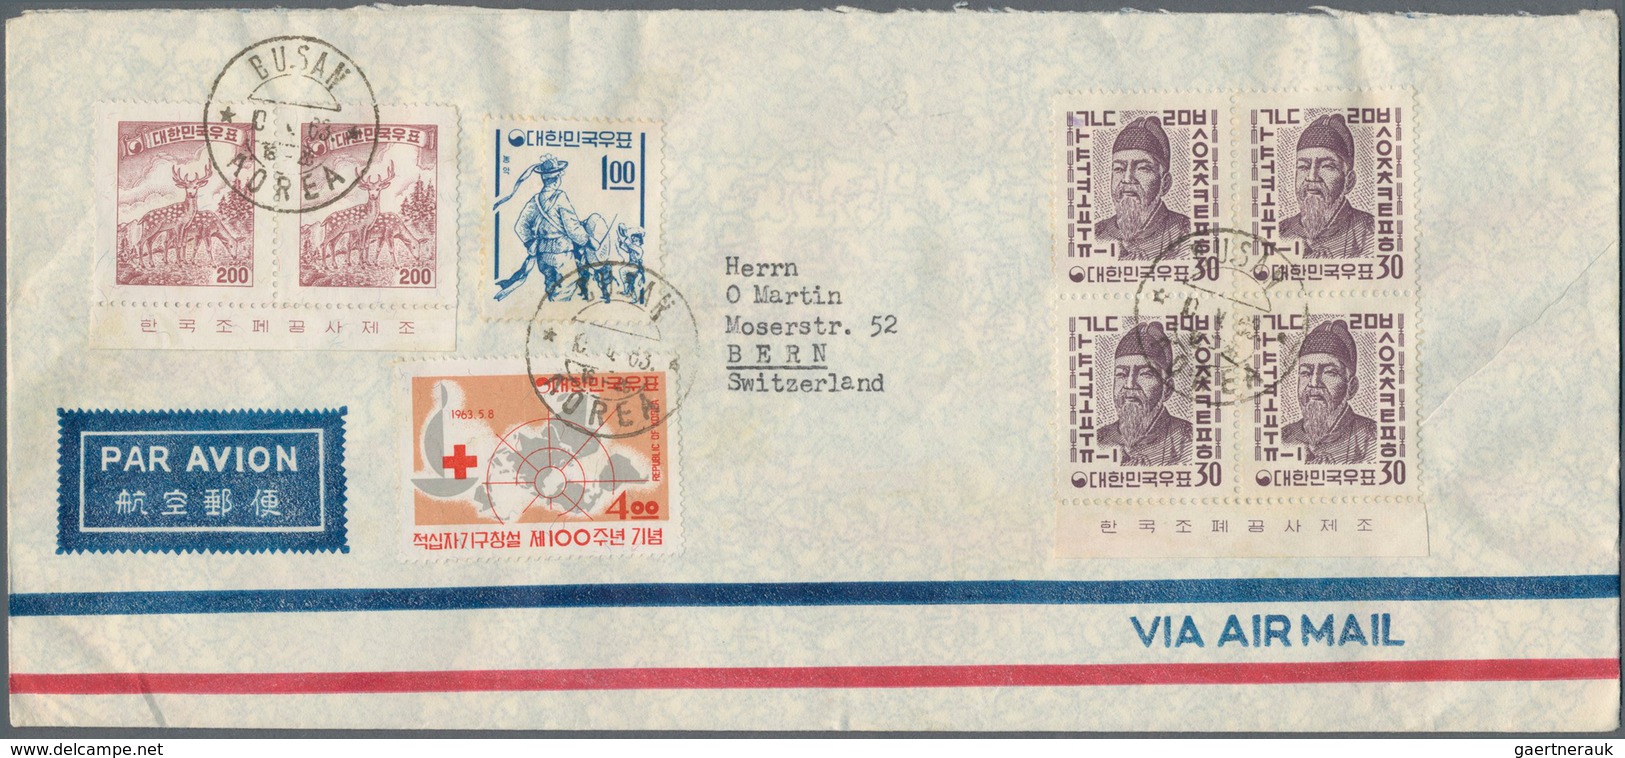 Korea-Süd: 1951/63 (ca.), Covers (22) Resp. Used Ppc (1) All To Foreign And Mostly Airmail And Inc. - Korea (Zuid)